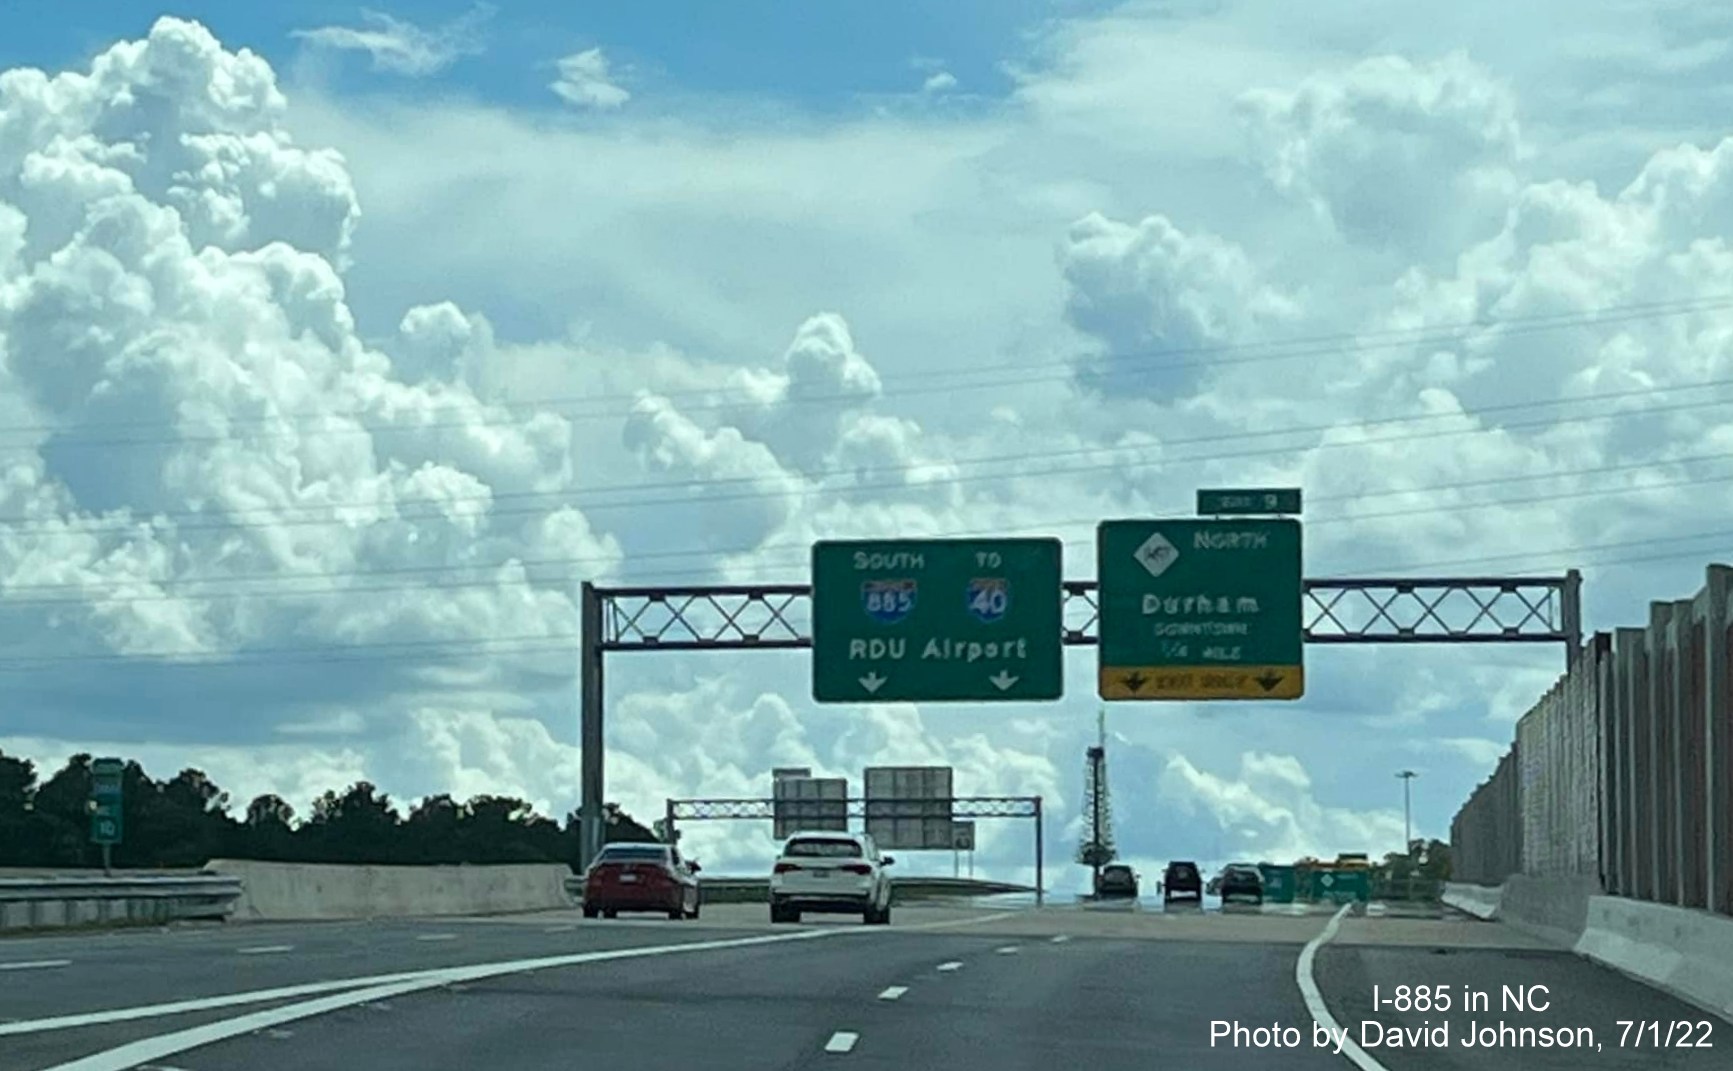 Image of merged US 70 East and I-885 South ramps on East End Connector in Durham, by David Johnson July 2022